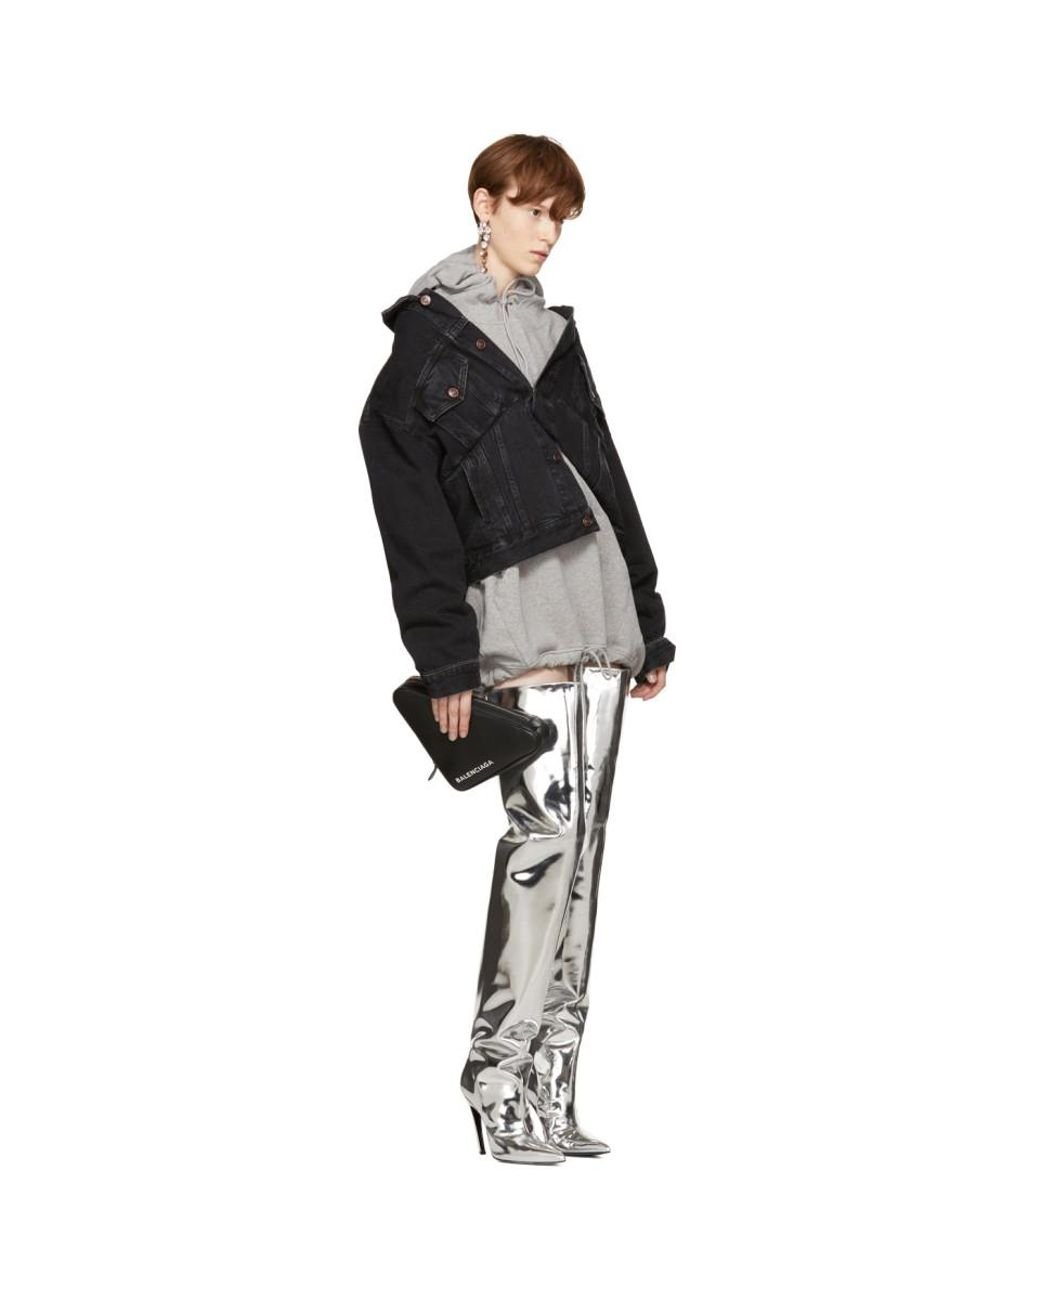 Balenciaga Leather Silver Mirror Heeled Over-the-knee Boots in Metallic |  Lyst